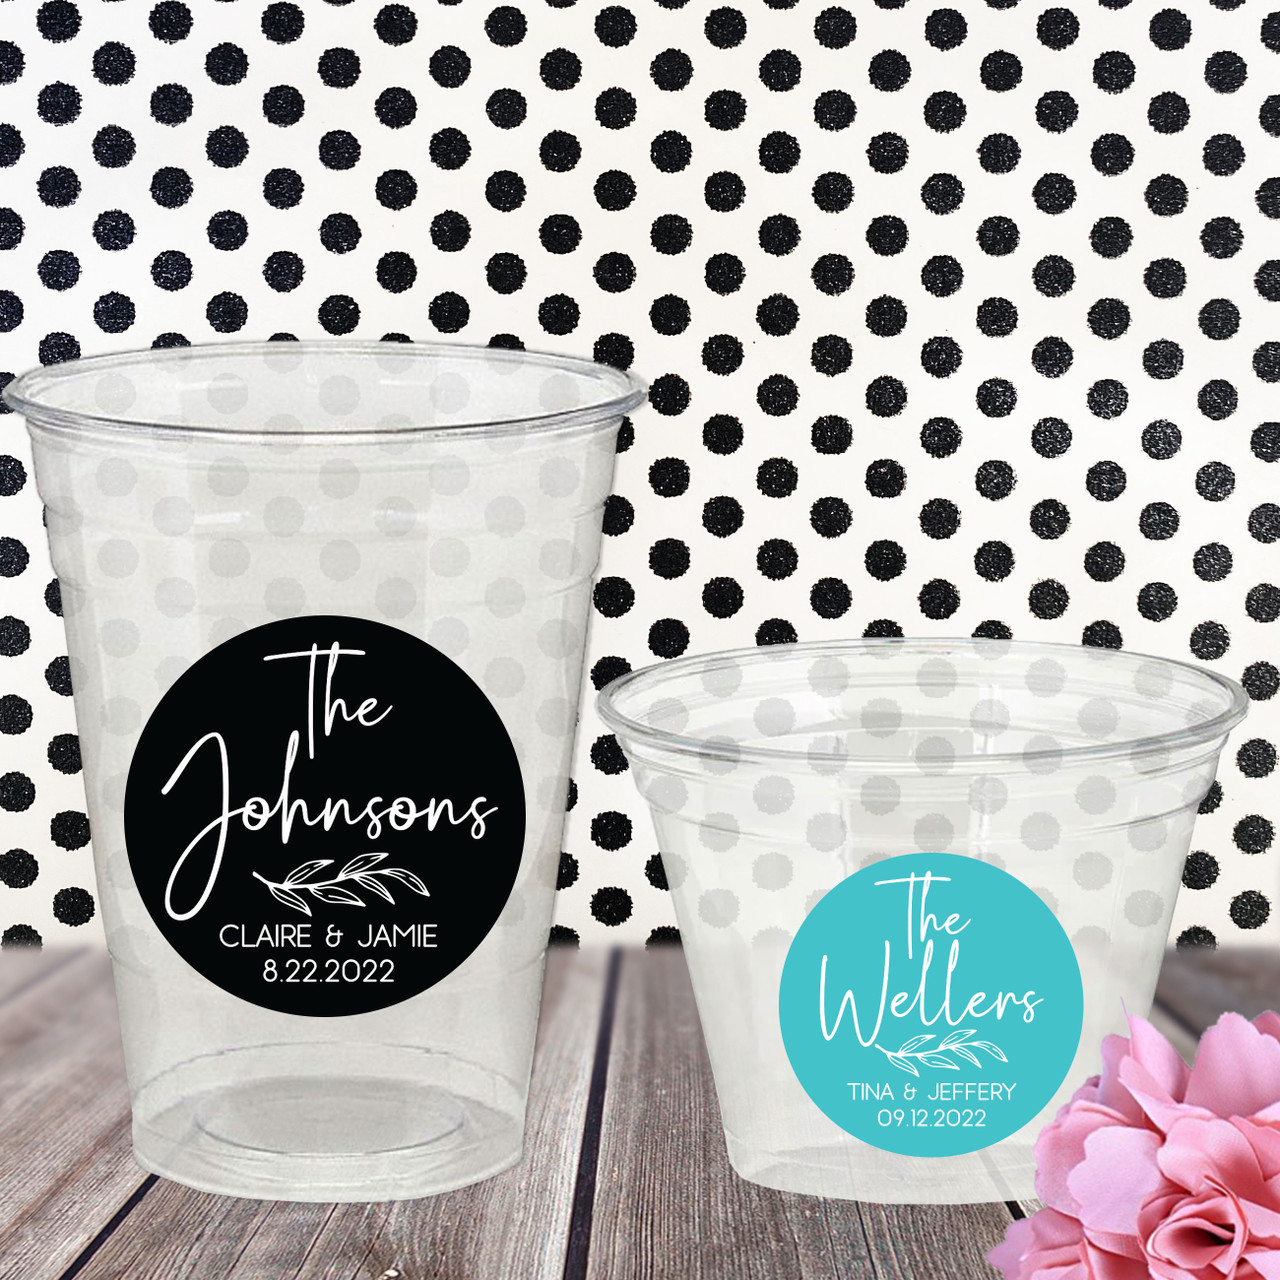 Personalized Cups Custom Cups Wedding Cups Wedding Favors for